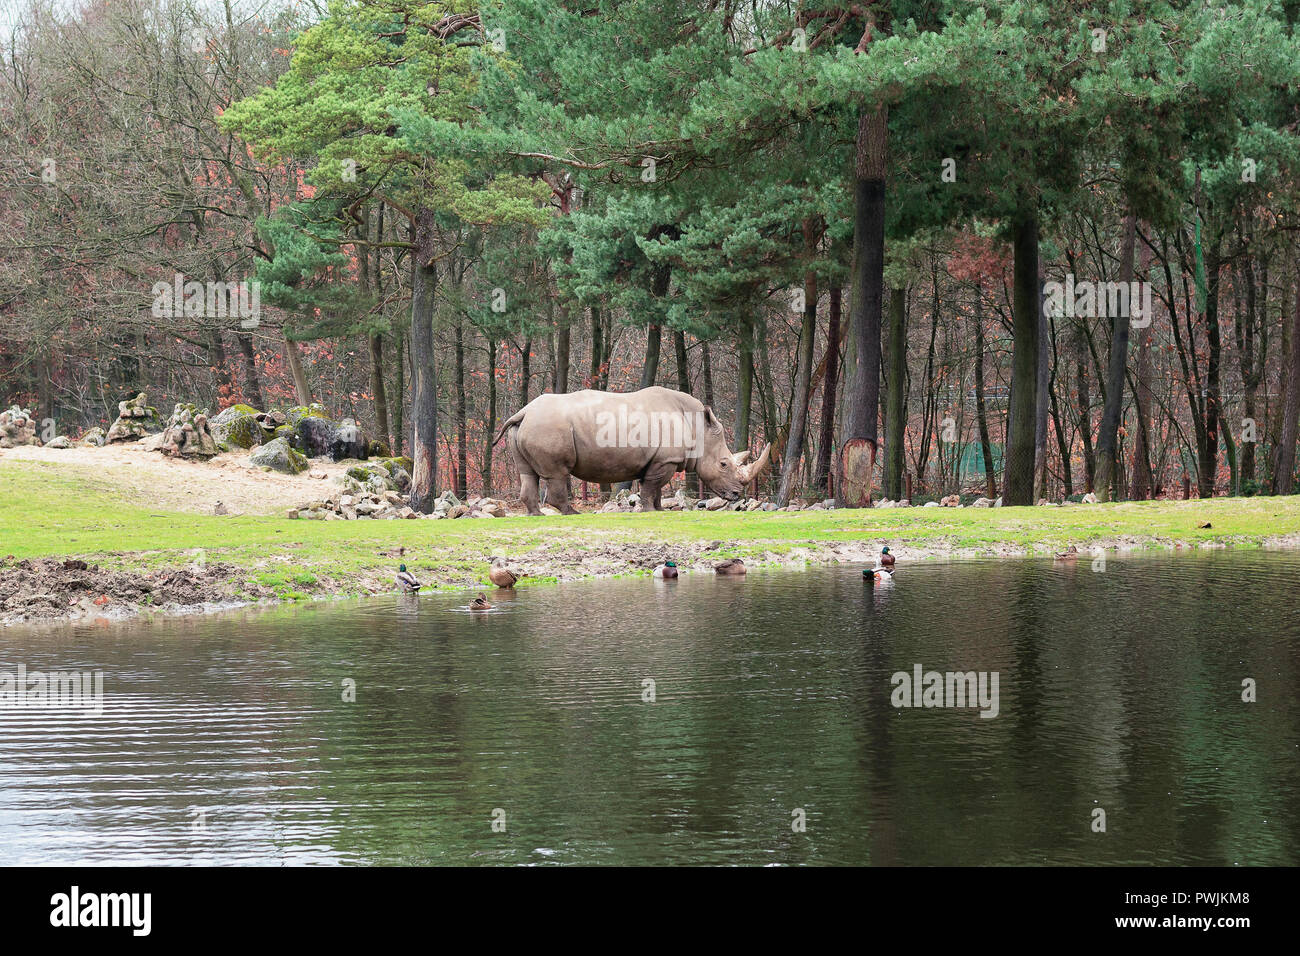 Rhinoceros on the edge of puddle in Burgers' Zoo in The Netherlands Stock Photo